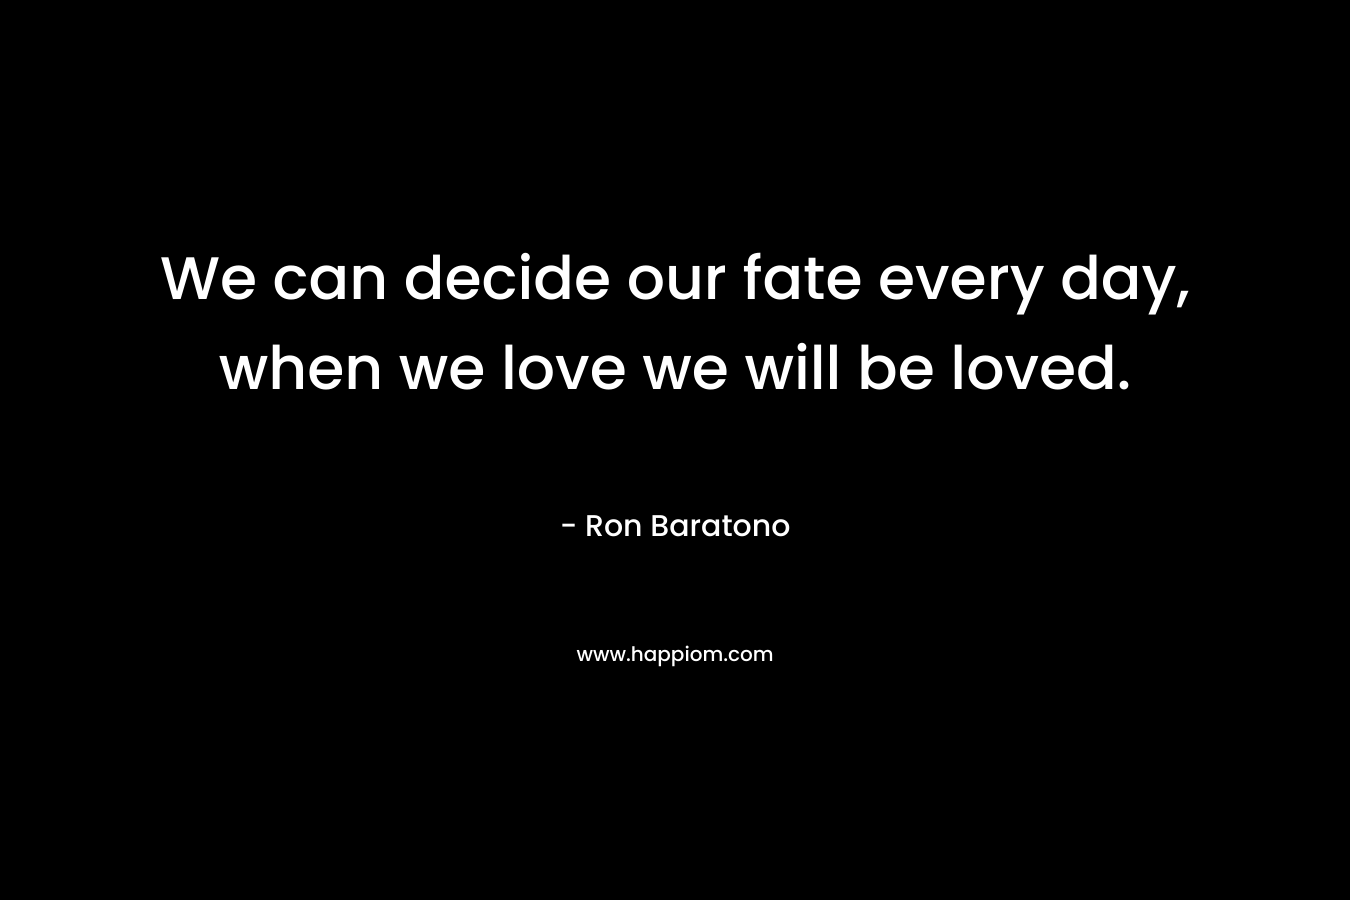 We can decide our fate every day, when we love we will be loved. – Ron Baratono